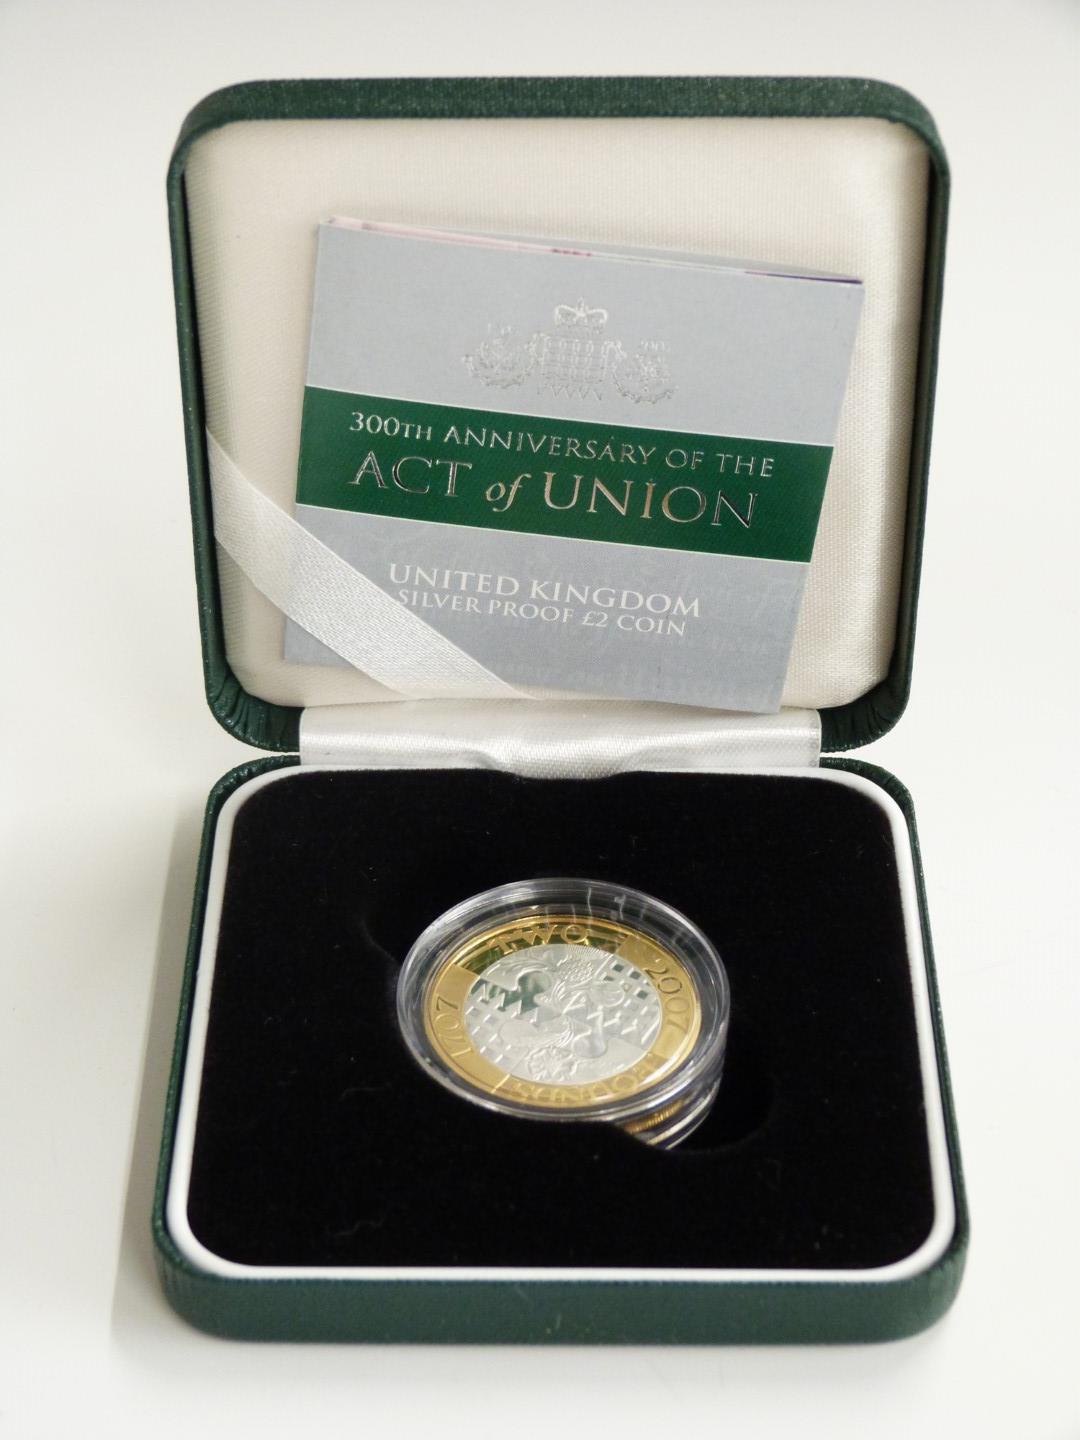 Four Royal Mint silver proof £2 coins for 2007, two Acts of Union and two slavery examples, all - Image 2 of 5